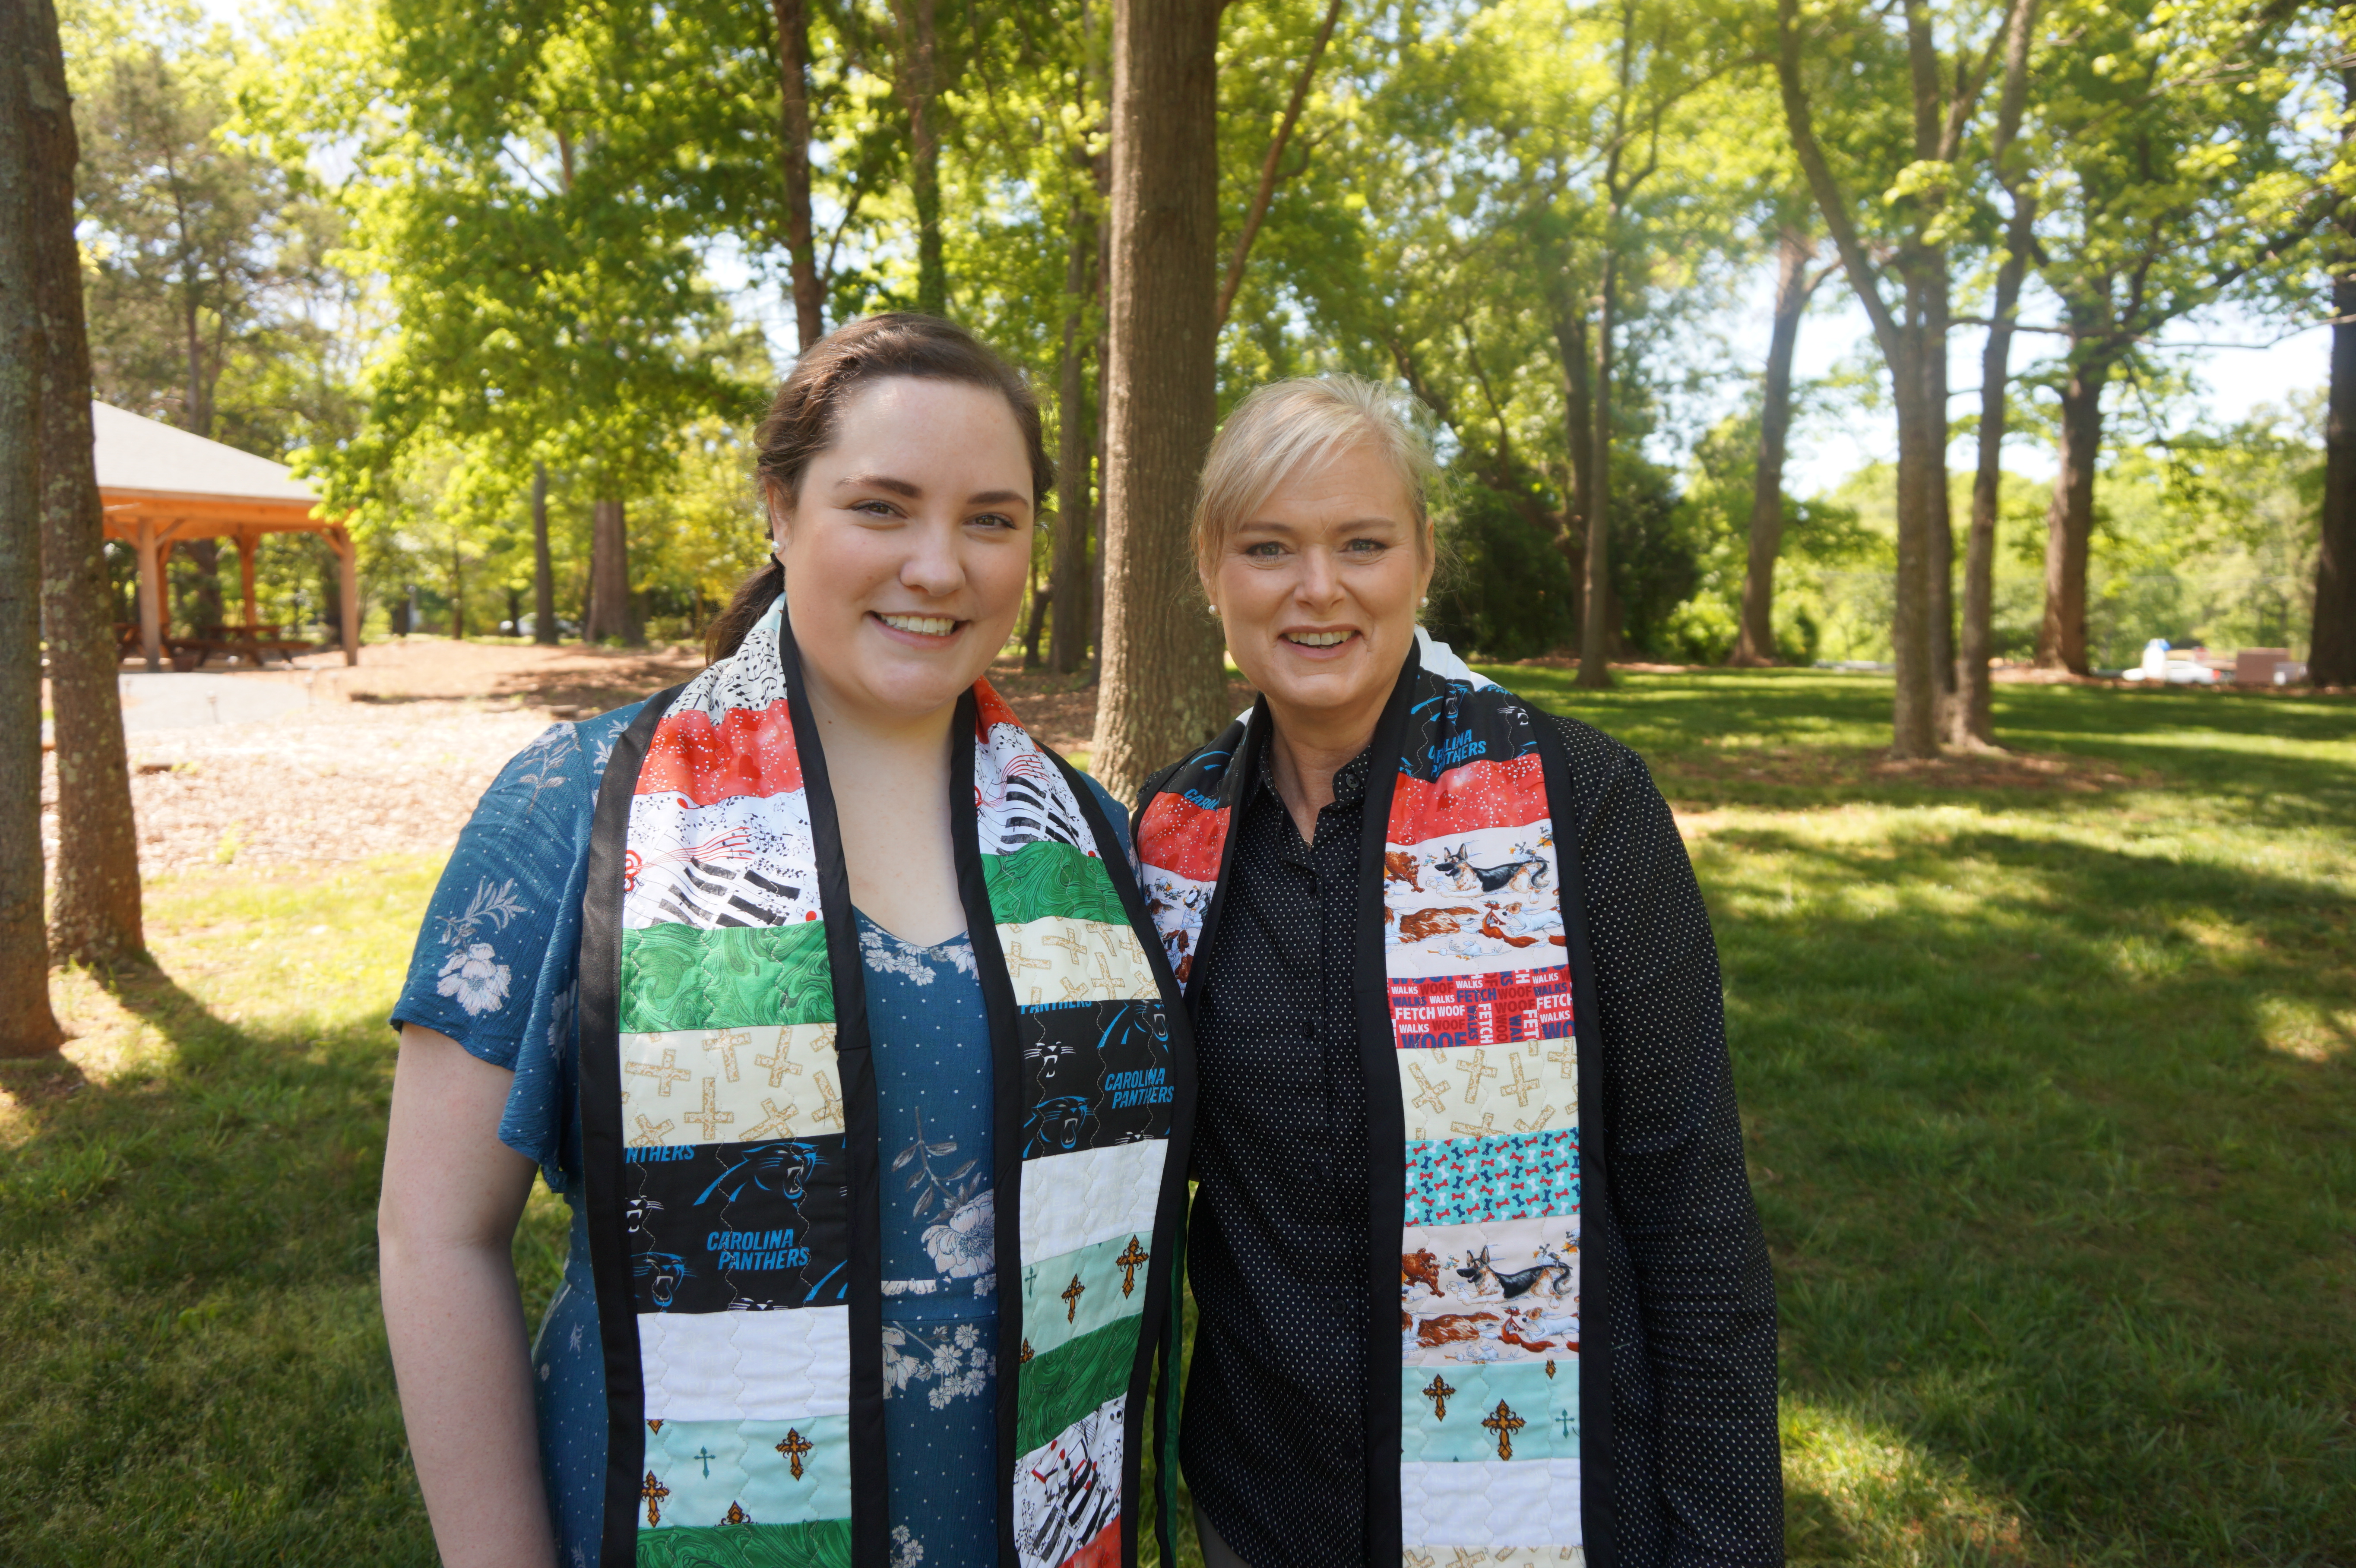 Sardis Ordains Hilary Kearns and Kathryn Kreutzer as Ministers of Music and Congregational Support